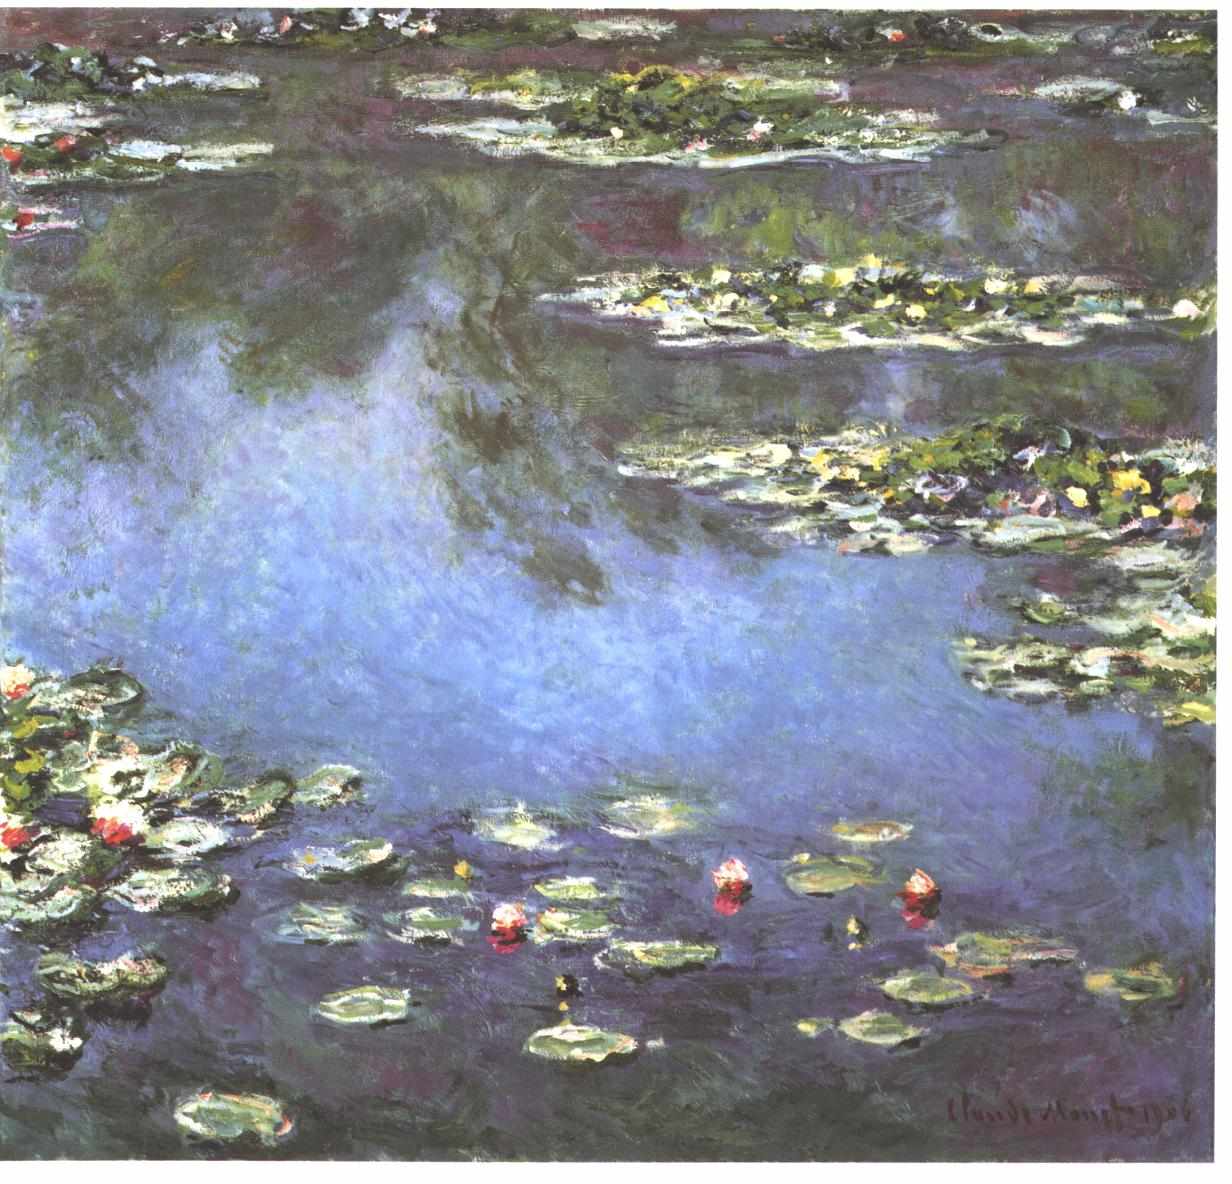 A lily pond with flowers and wide petals and the sky reflection on the water